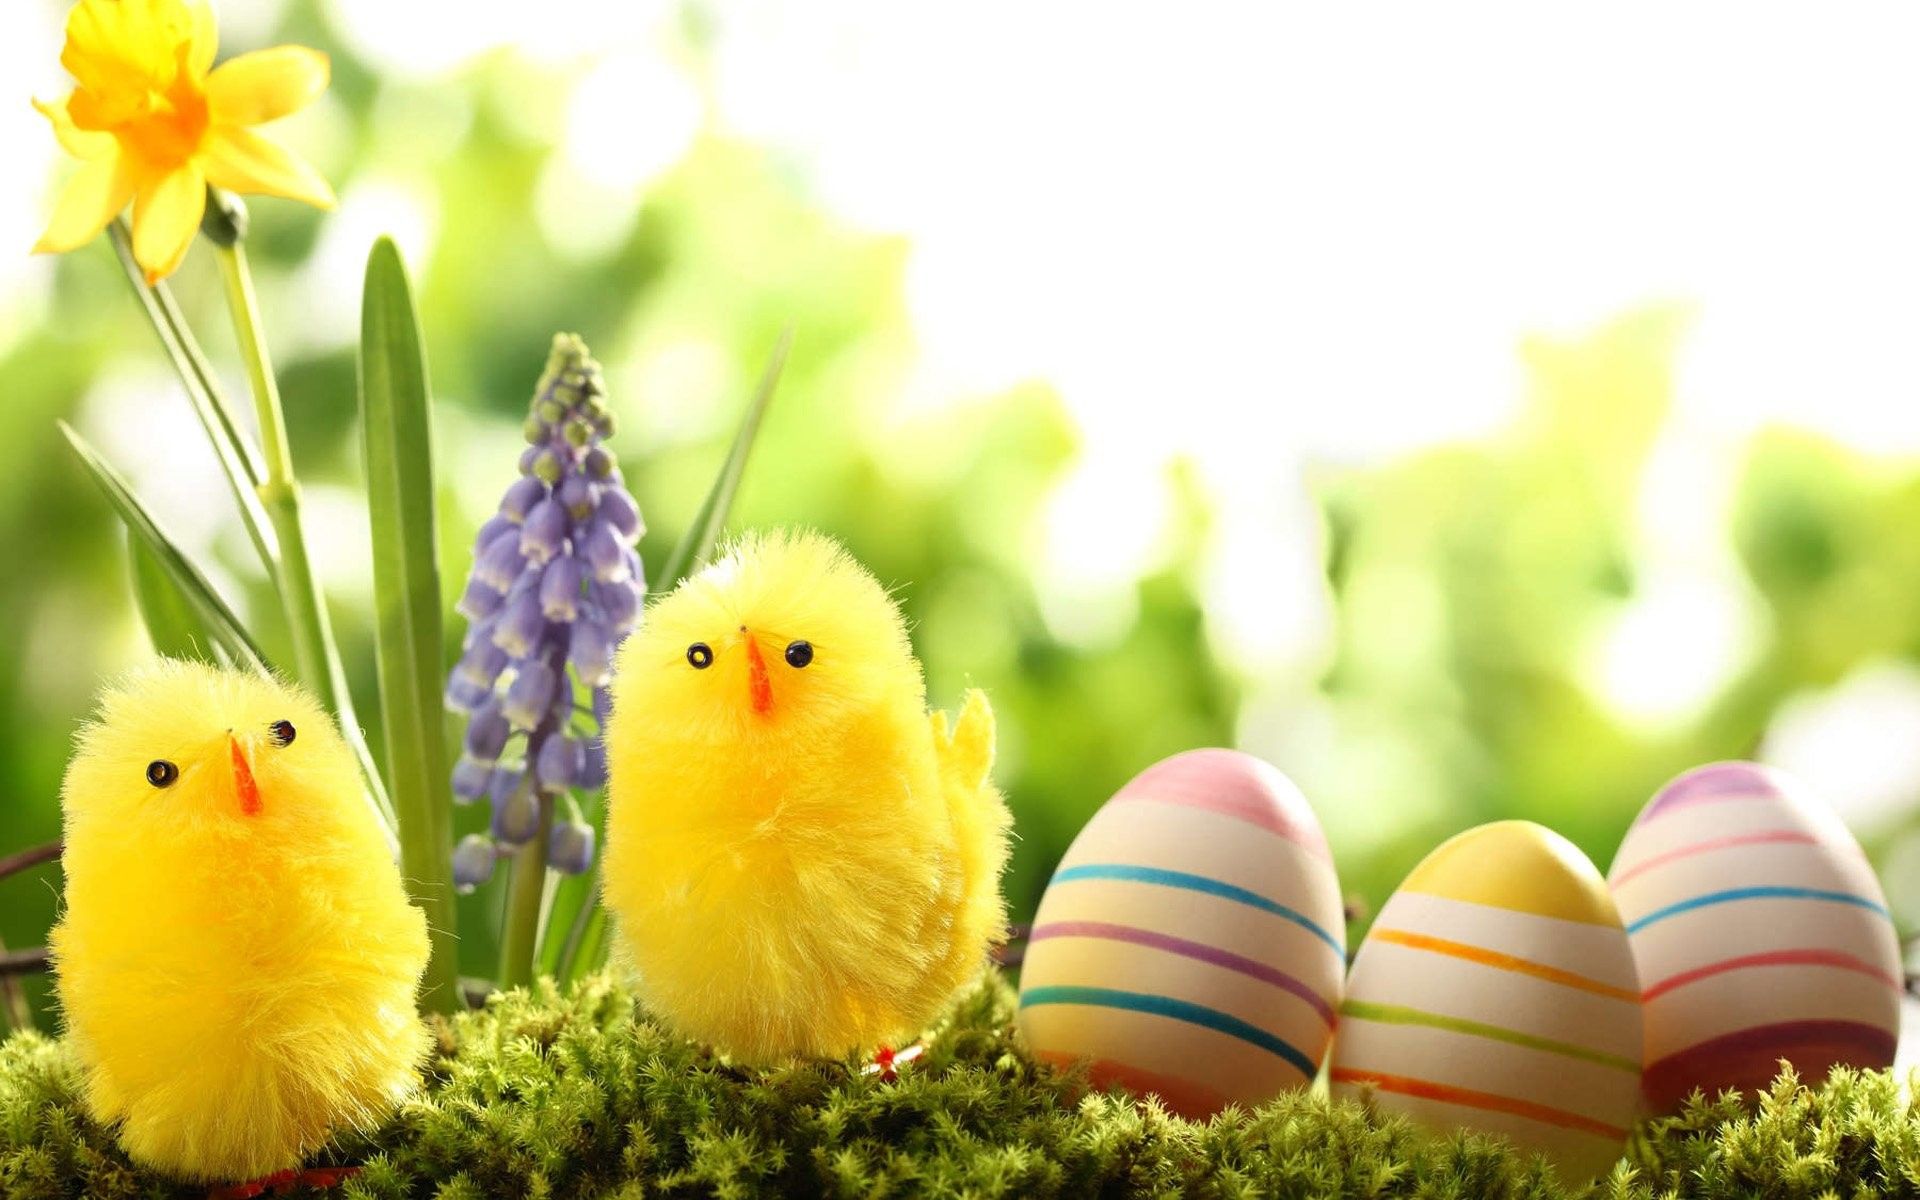 The easter eggs and chicks - Easter